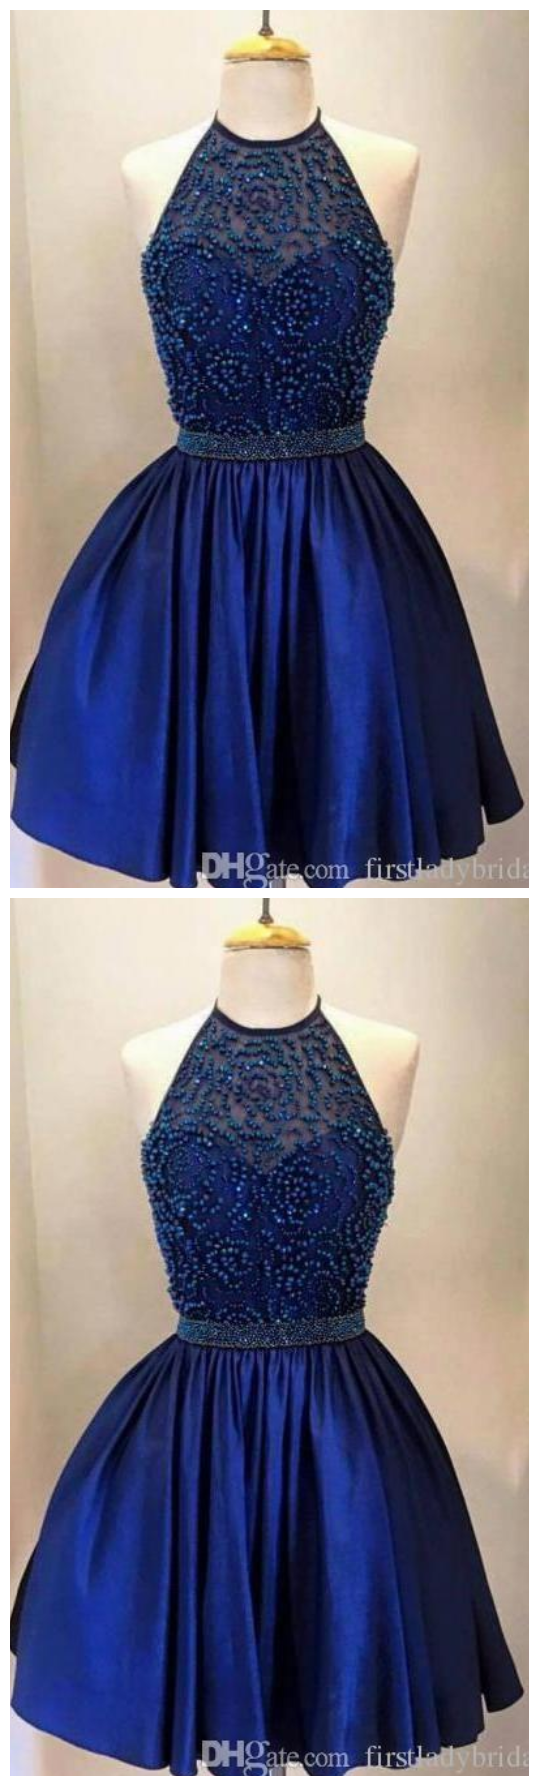 Royal Blue Short Mini Homecoming Dresses Beaded Ball Gown Halter Real Picture Summer Girls Prom Graduation Dress